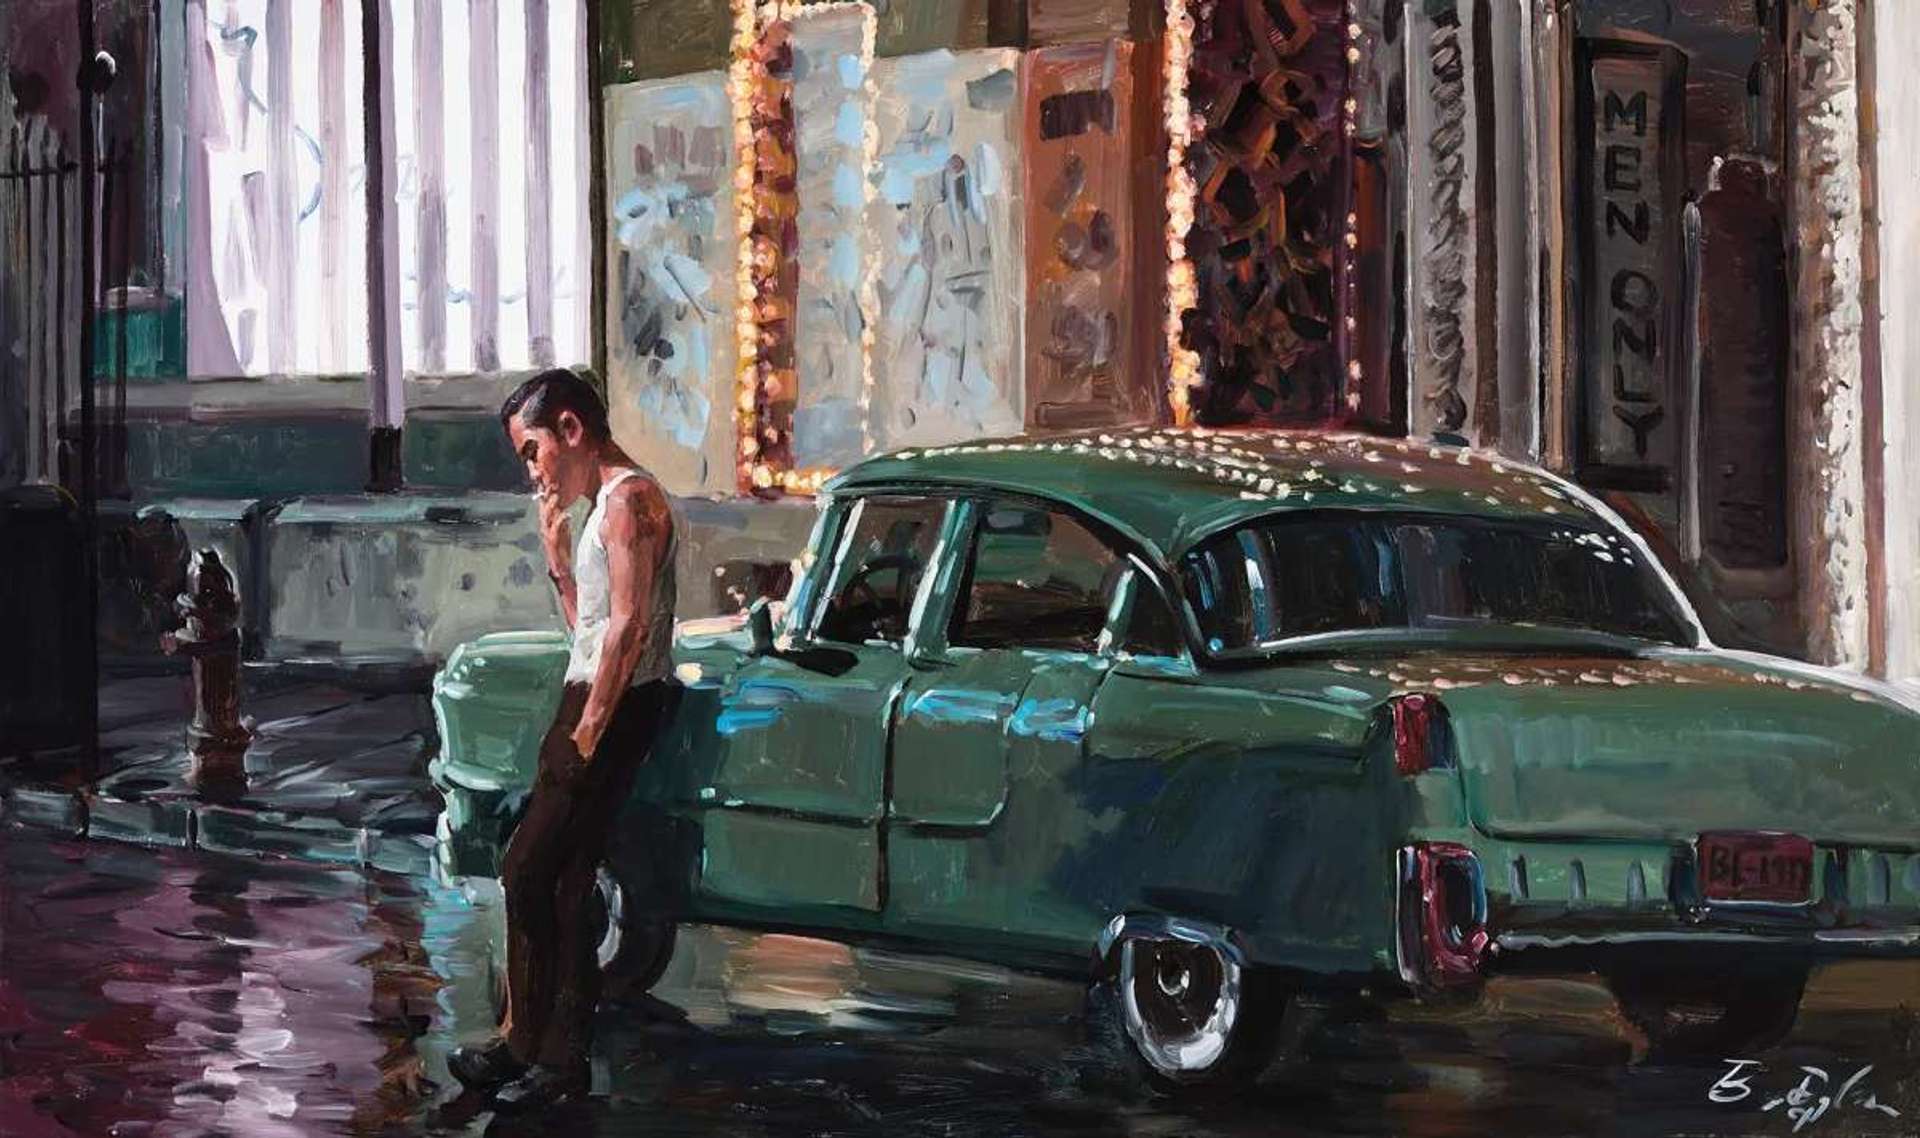 A painting by artist Bob Dylan, depicting a man smoking a cigarette while leaning against an old-school green car.